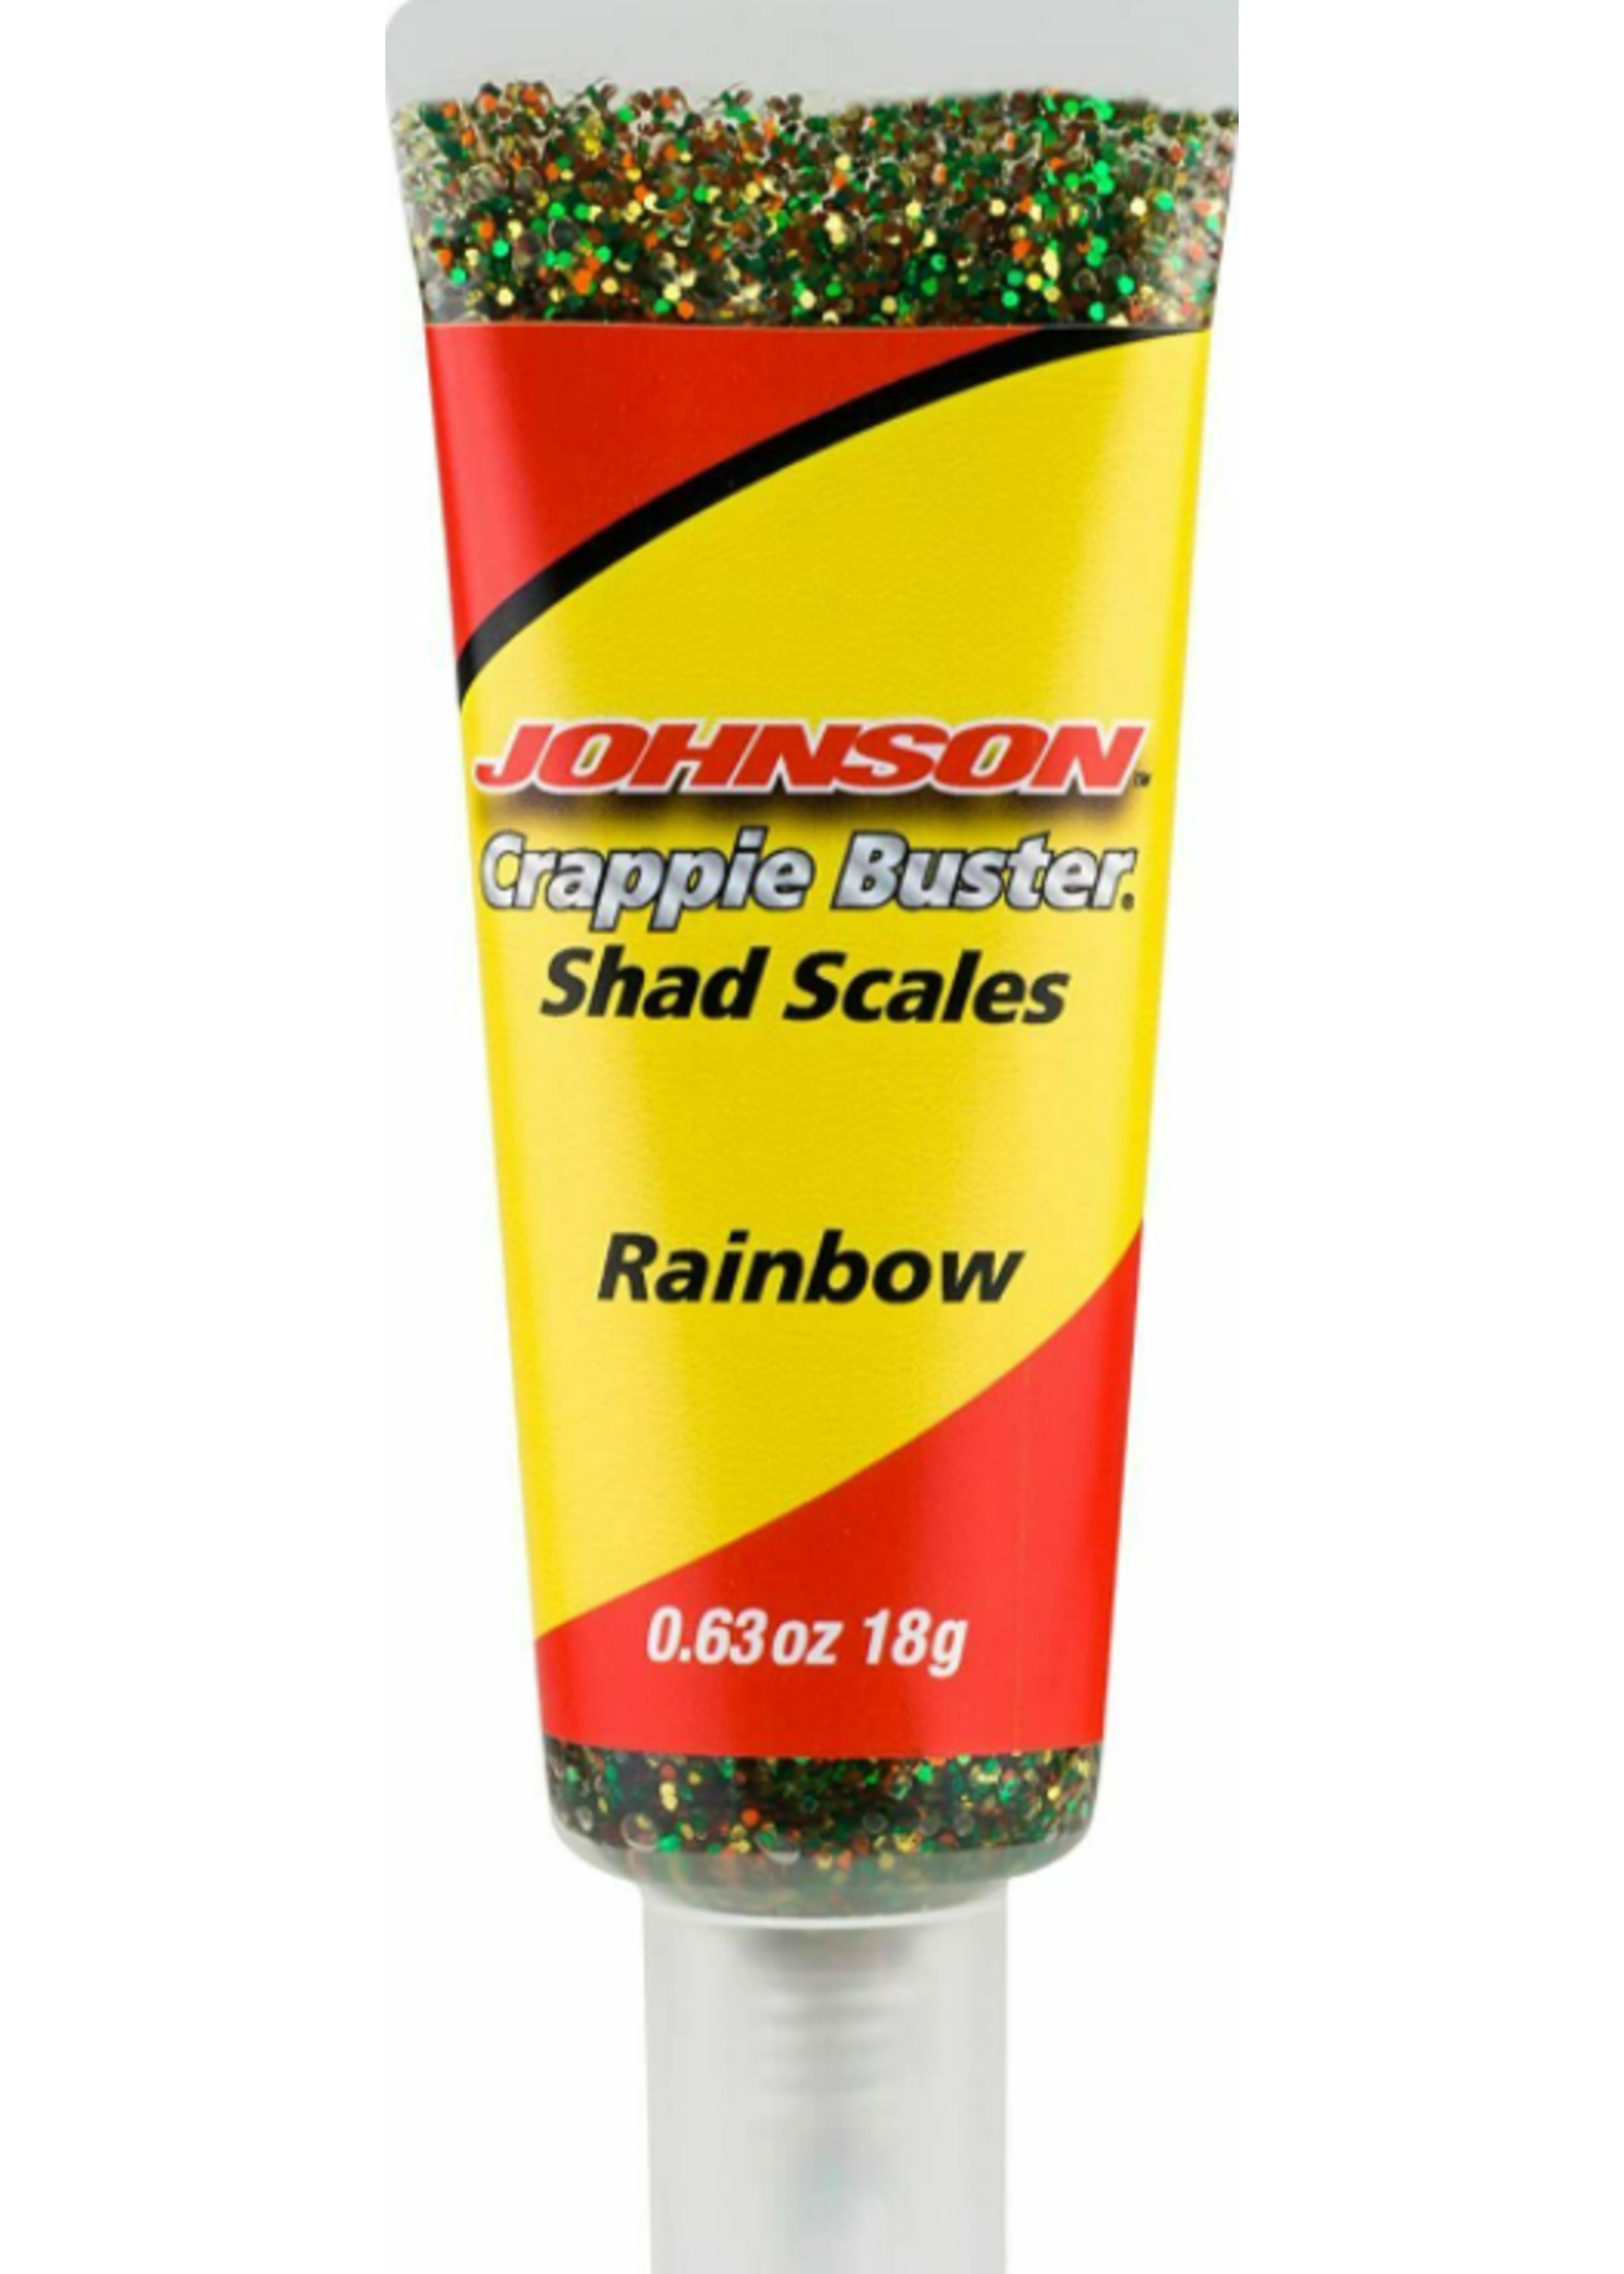 Johnson Crappie Buster Shad Scales - Rainbow